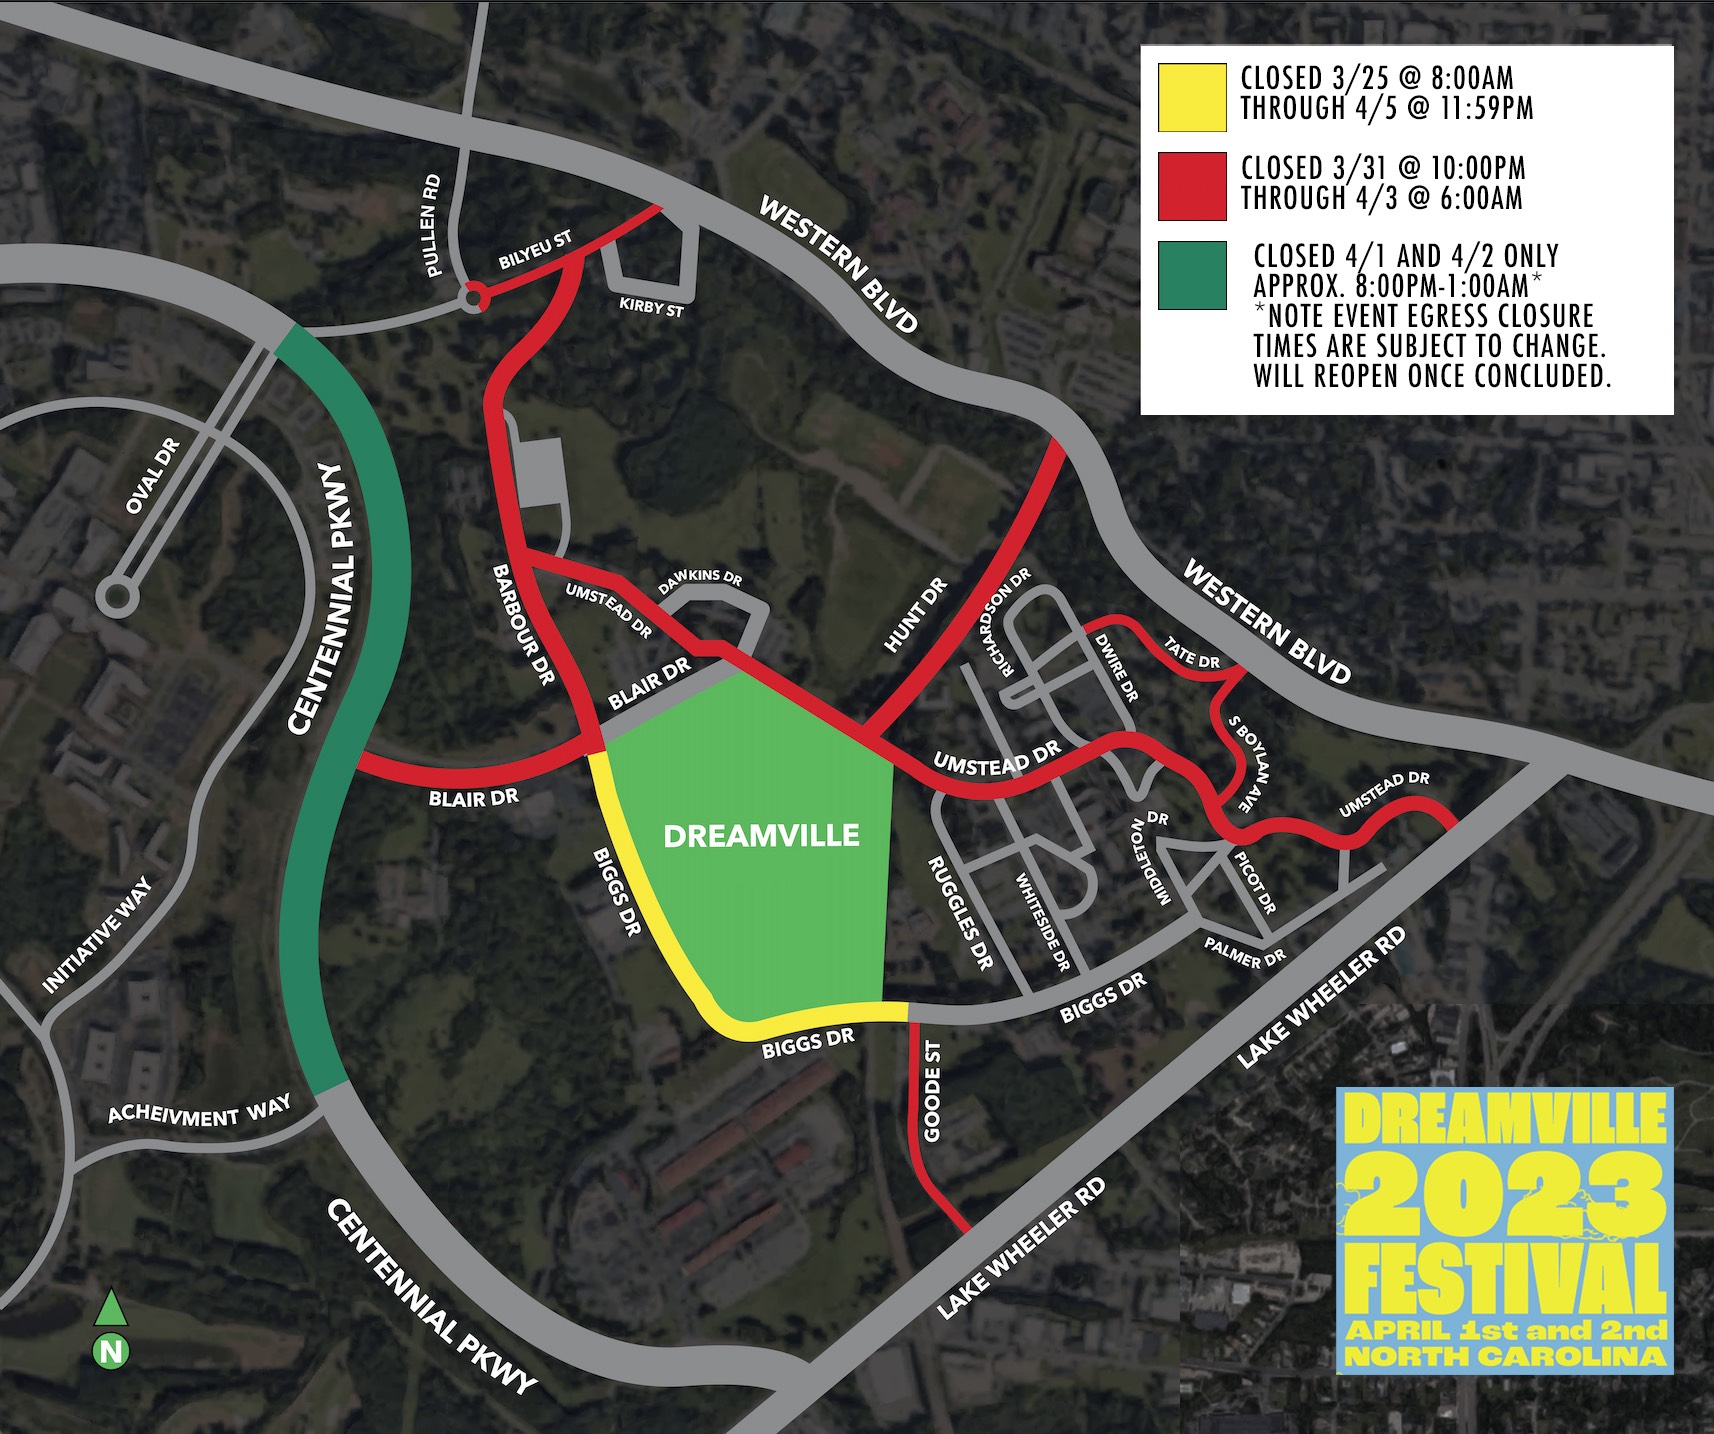 Dreamville Festival 2023 Road Closure Map and Schedule